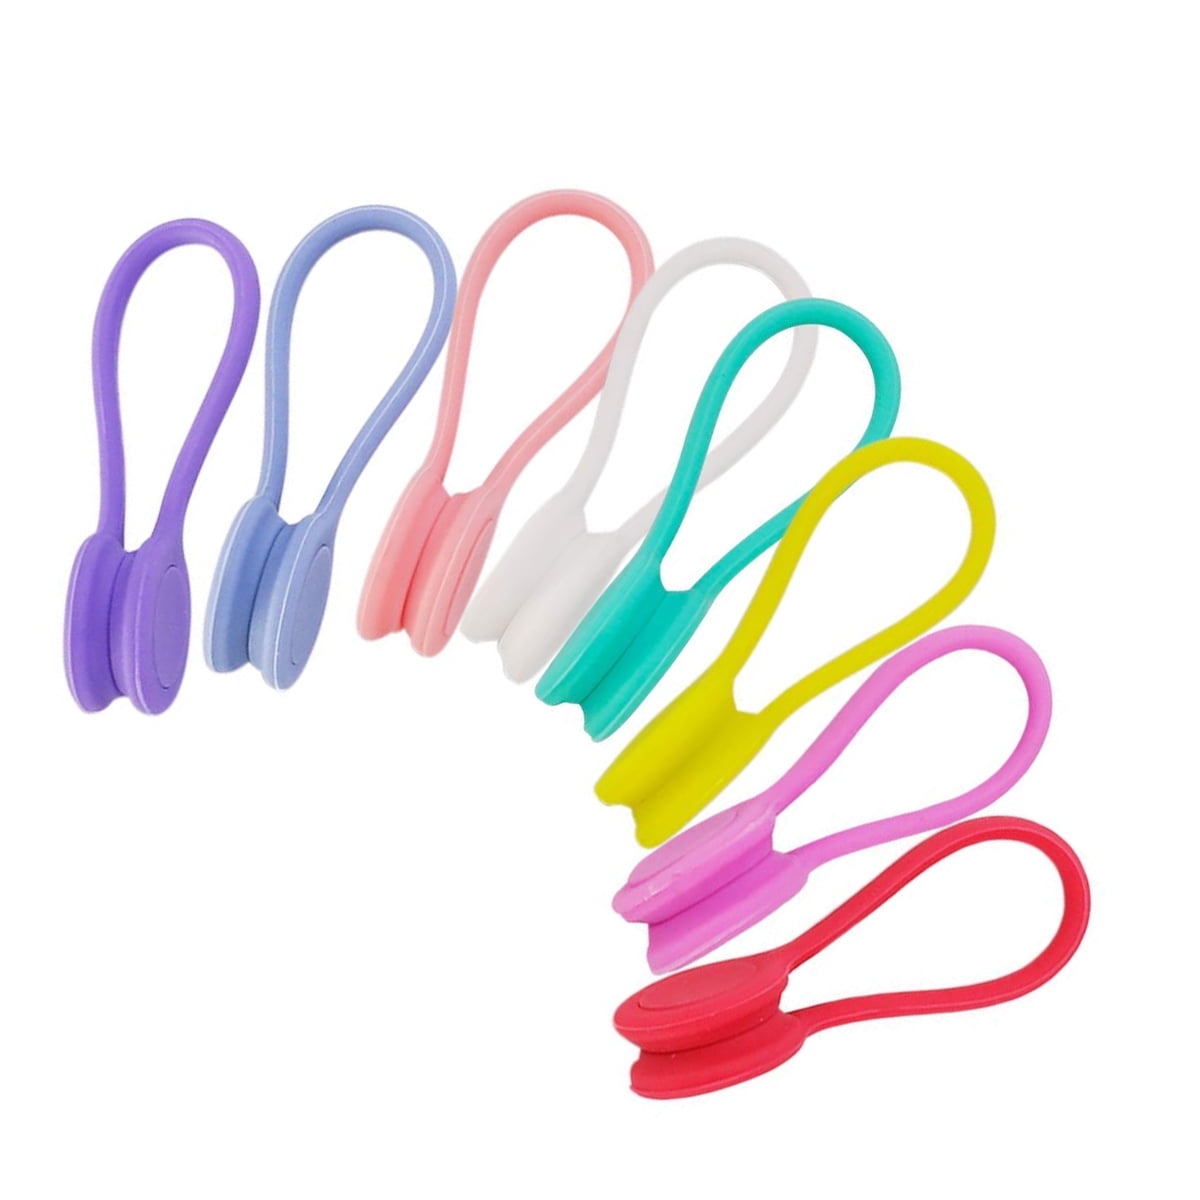 by Newtiy 16pcs Multicolor Strong Magnet Winder Wrap Magnetic Cable Clips for Headphones/Earphones/USB Cable/Keychain etc Magnetic Twist Ties 